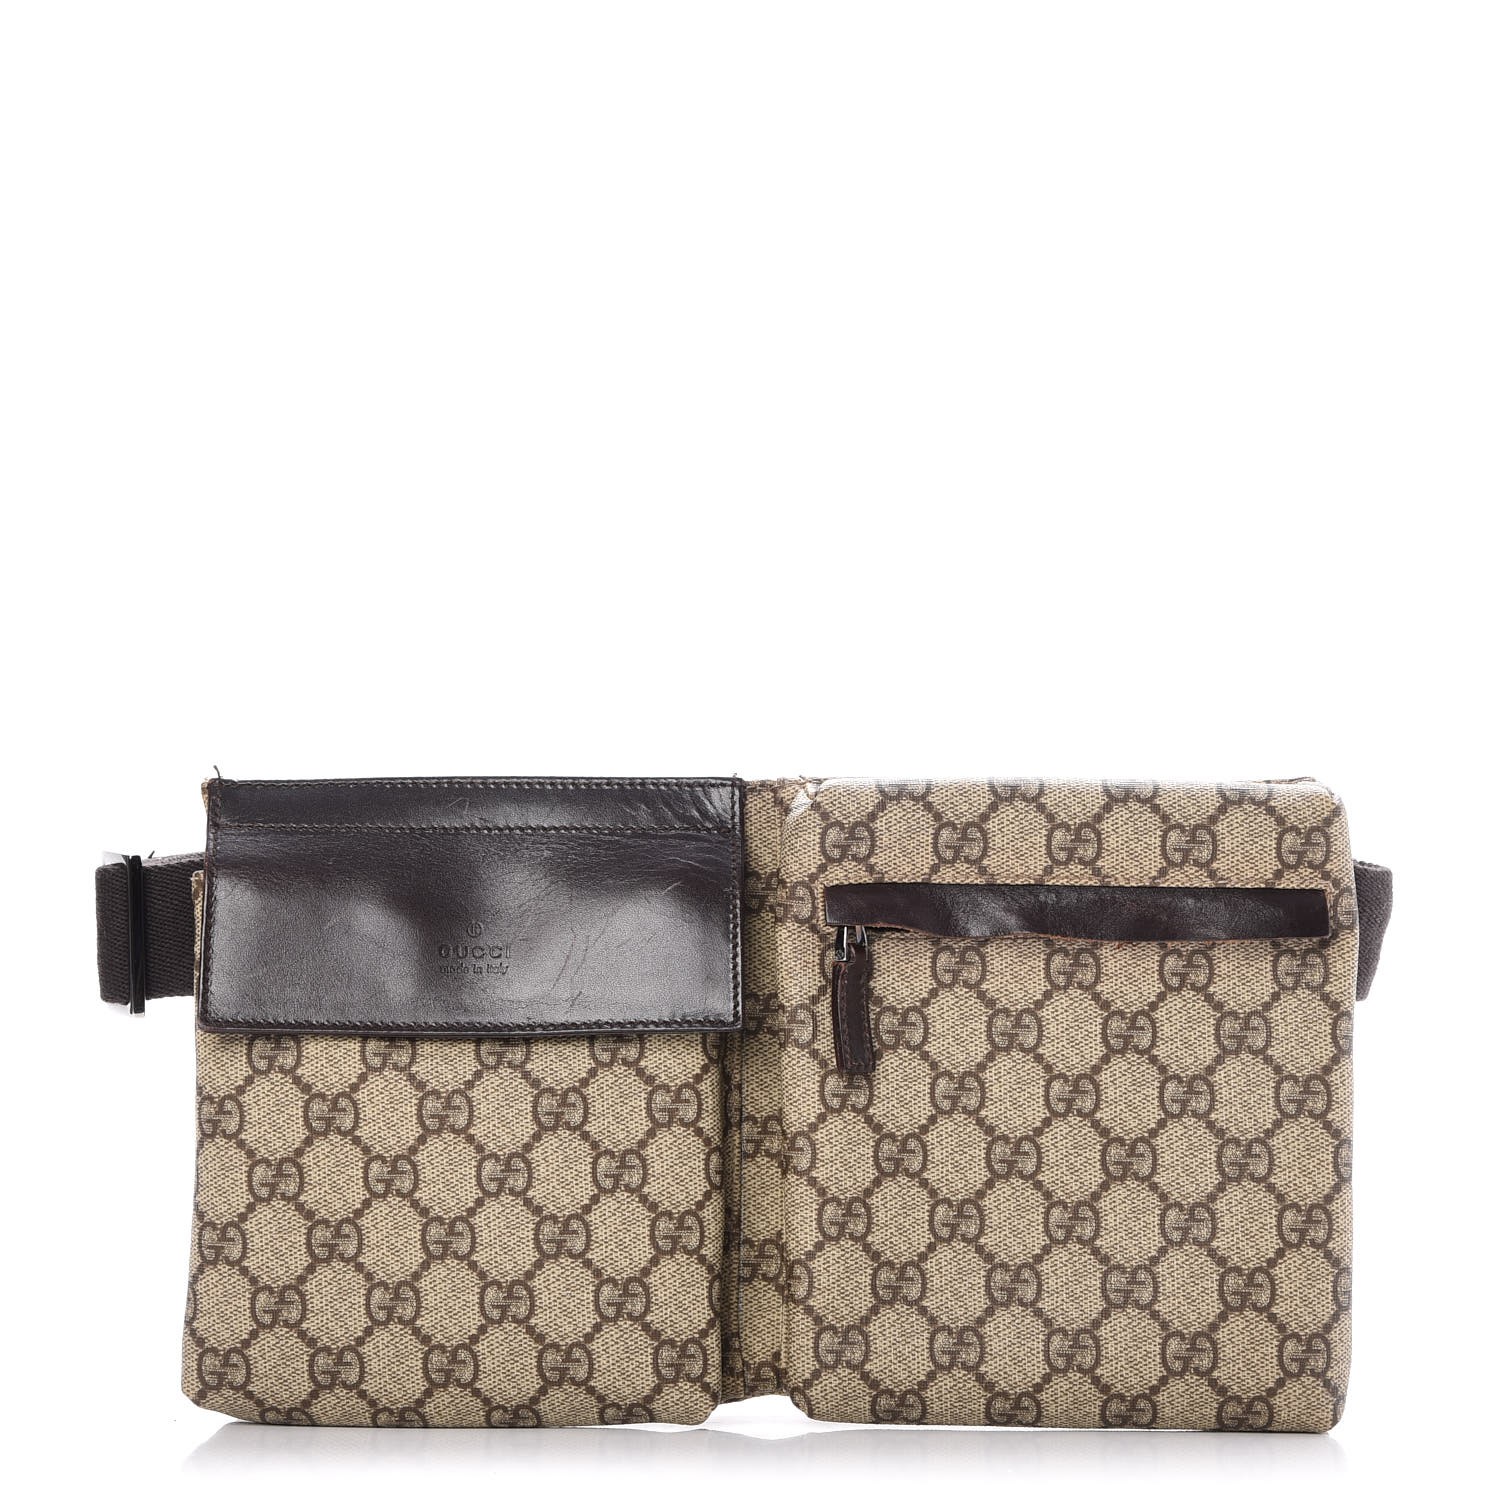 28566 gucci,Save up to 19%,www.ilcascinone.com